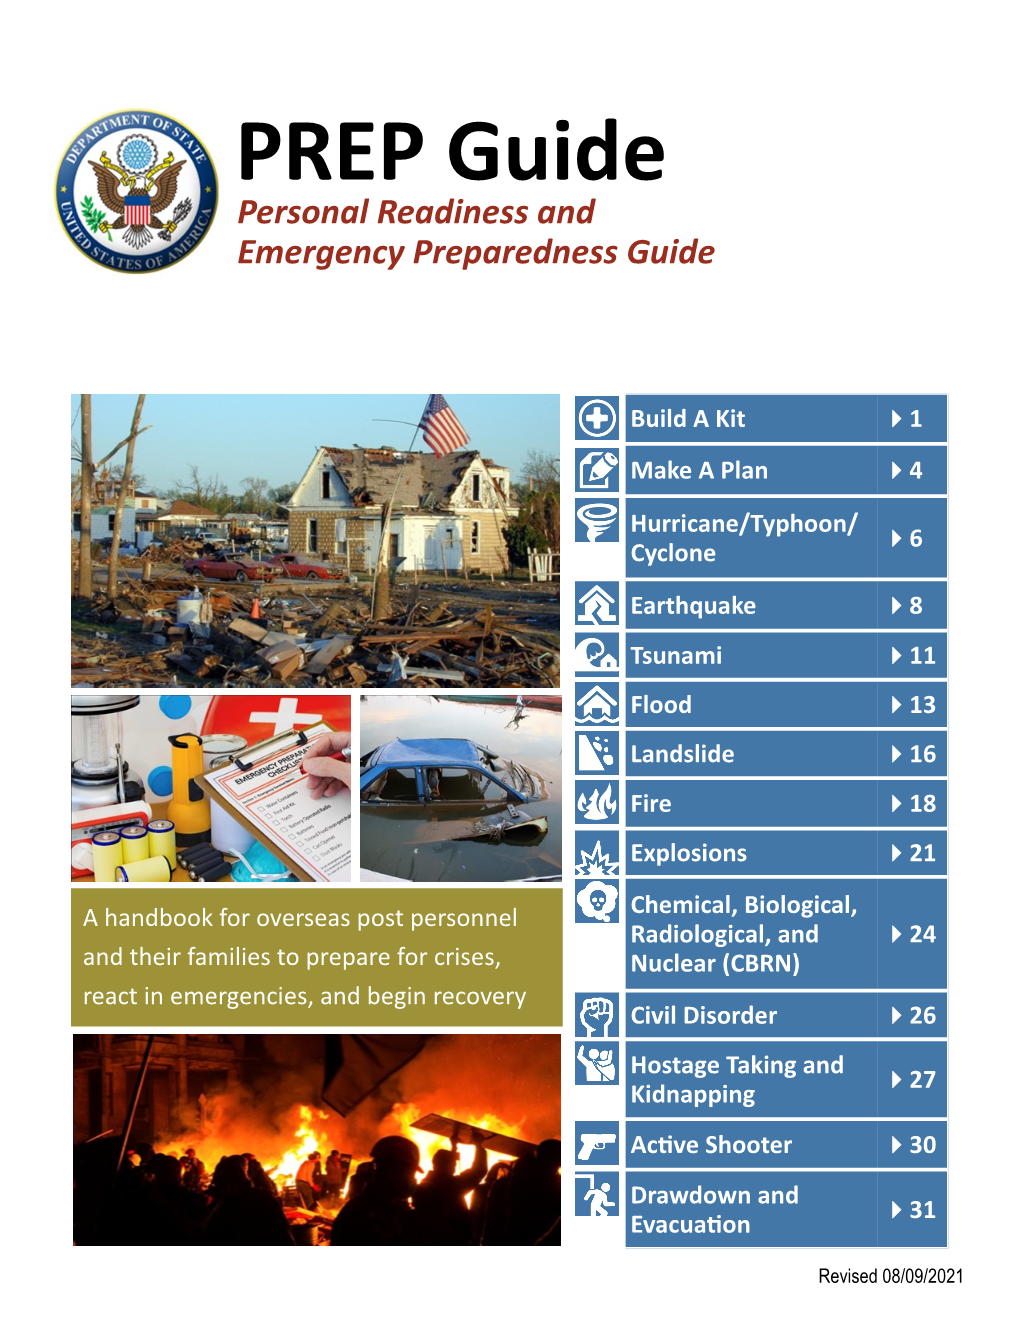 PREP Guide Personal Readiness and Emergency Preparedness Guide